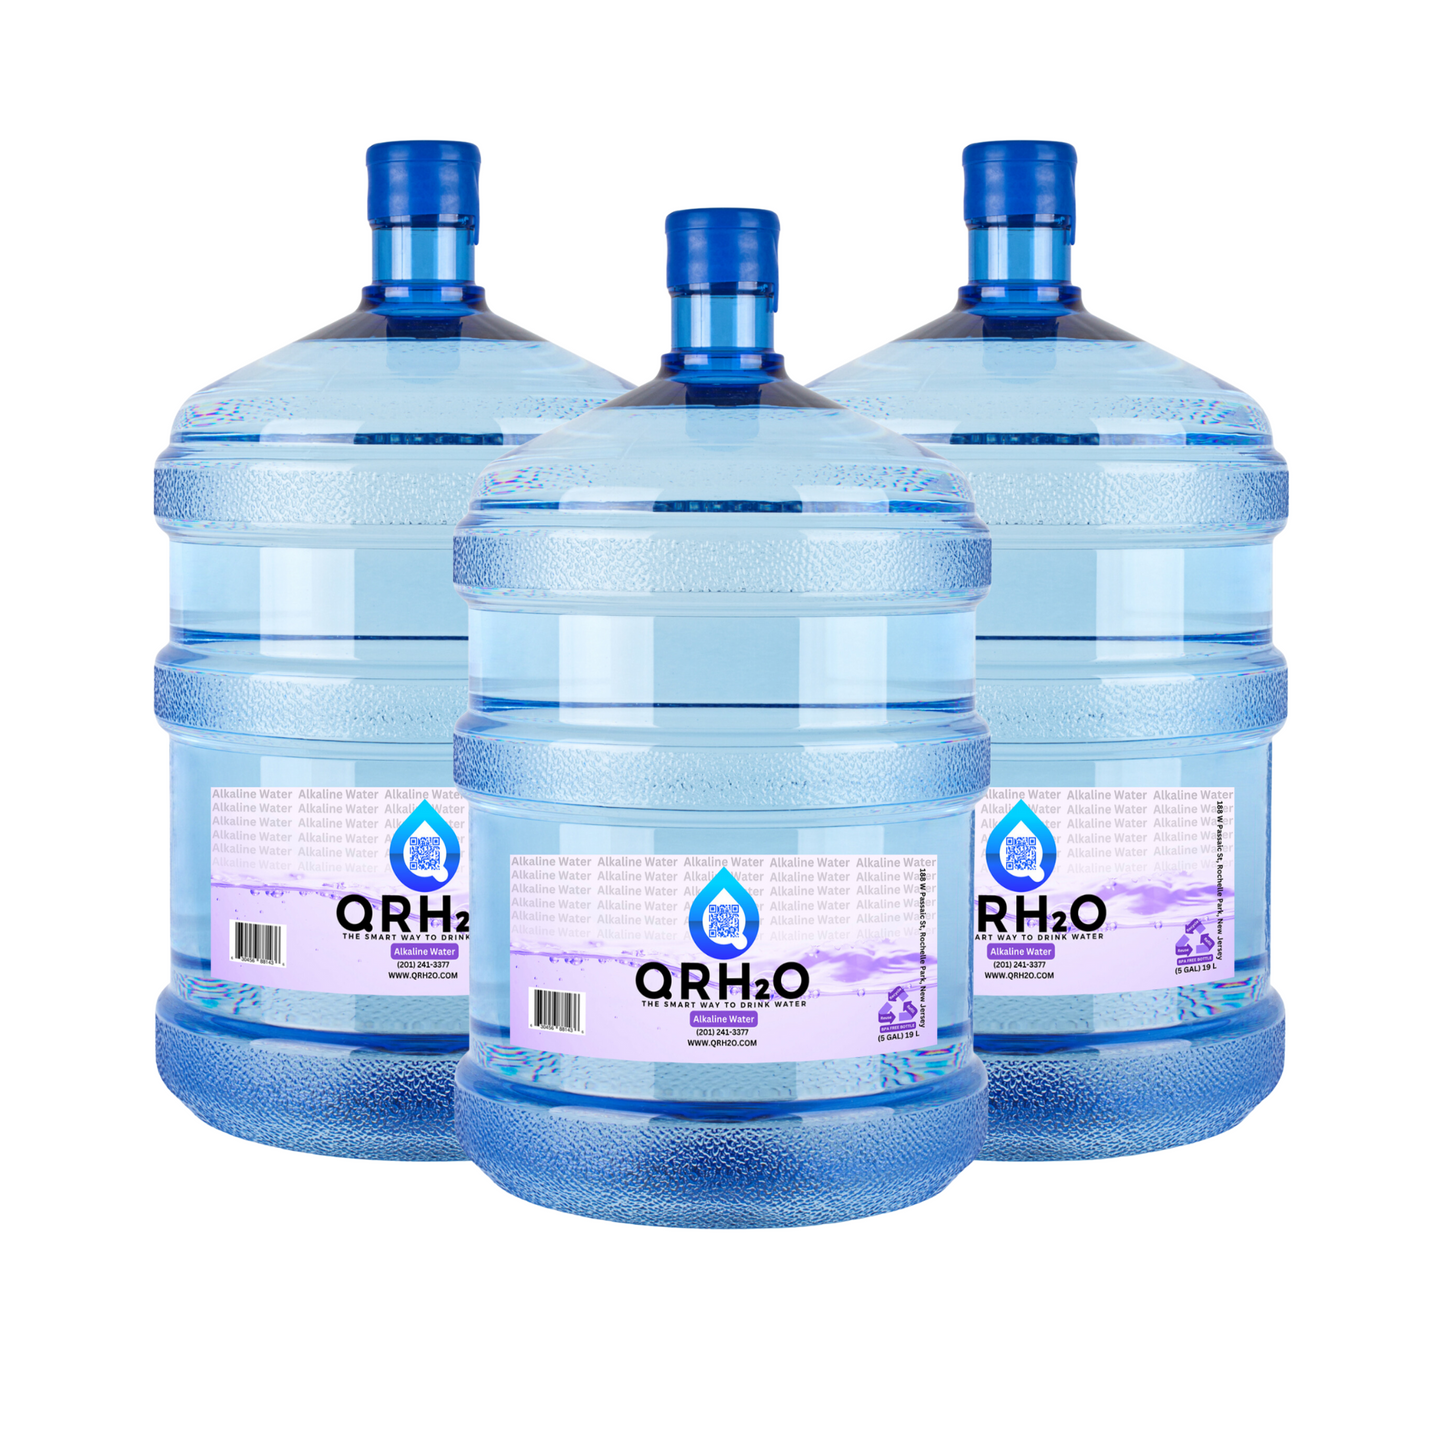 Limited Time Offer: 3 x 5-Gallon Bottles - Choose Purified or Alkaline Water, Pay for 2 and Get the 3rd One Free